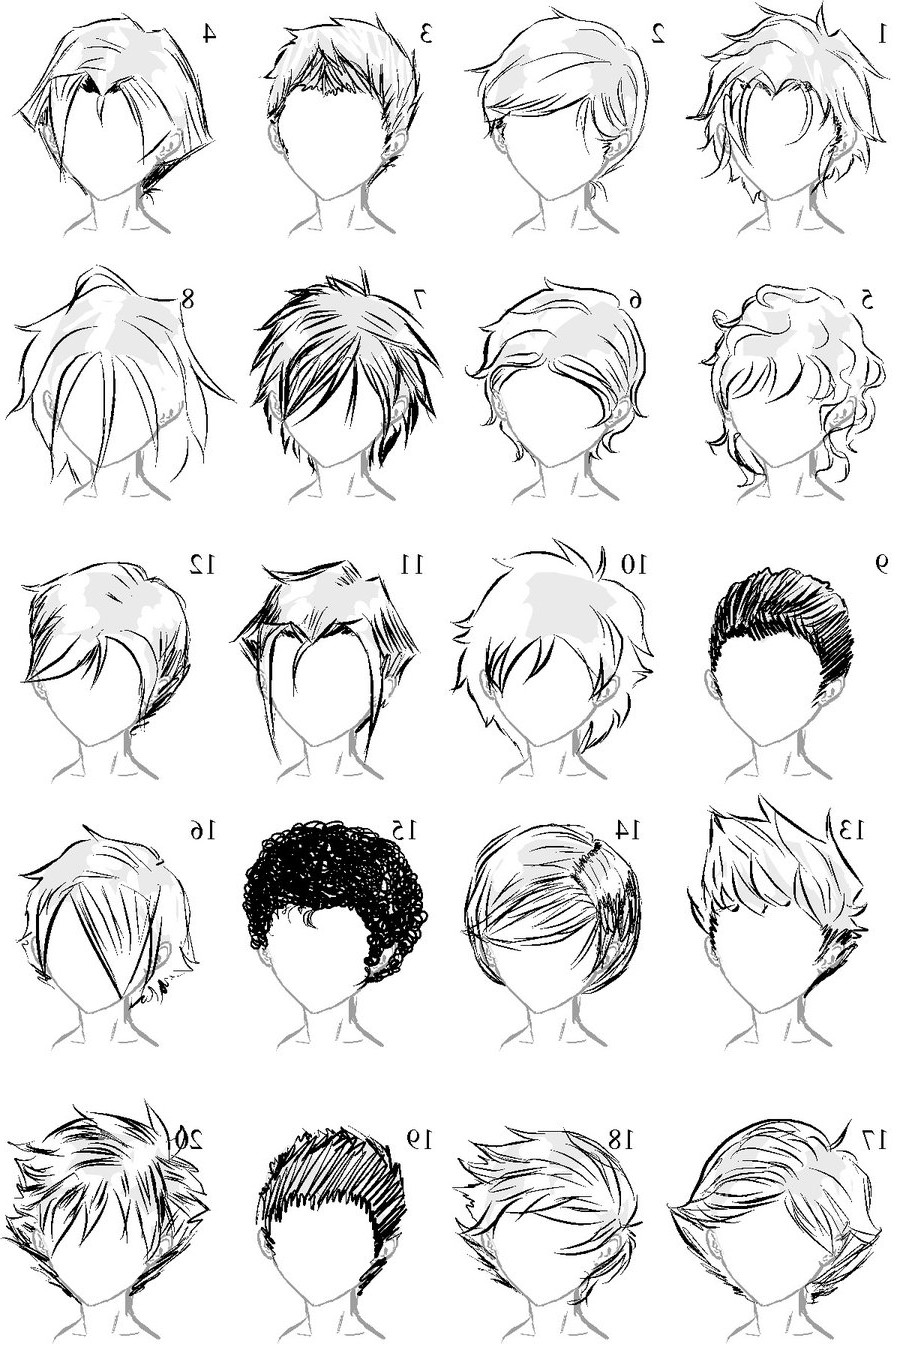 Boy Hairstyles Drawing
 Male Anime Hairstyles Drawing at PaintingValley